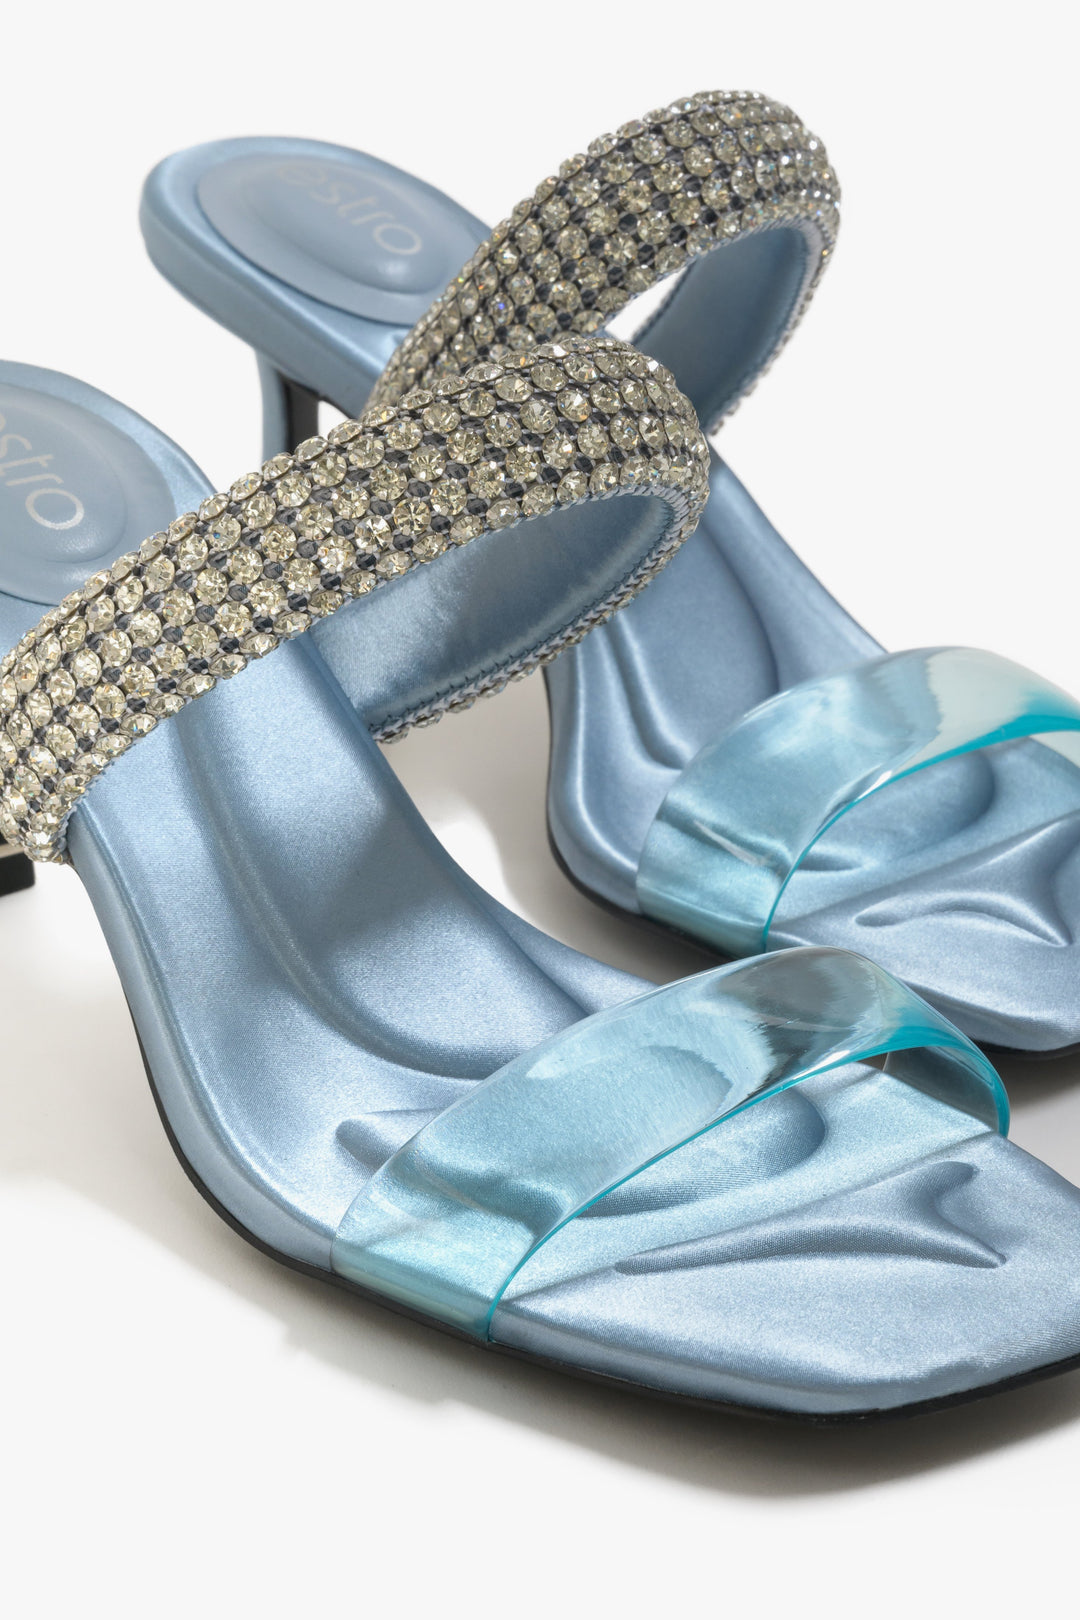 Women's blue slide sandals with stiletto heel and zirconia - presentation form the top.